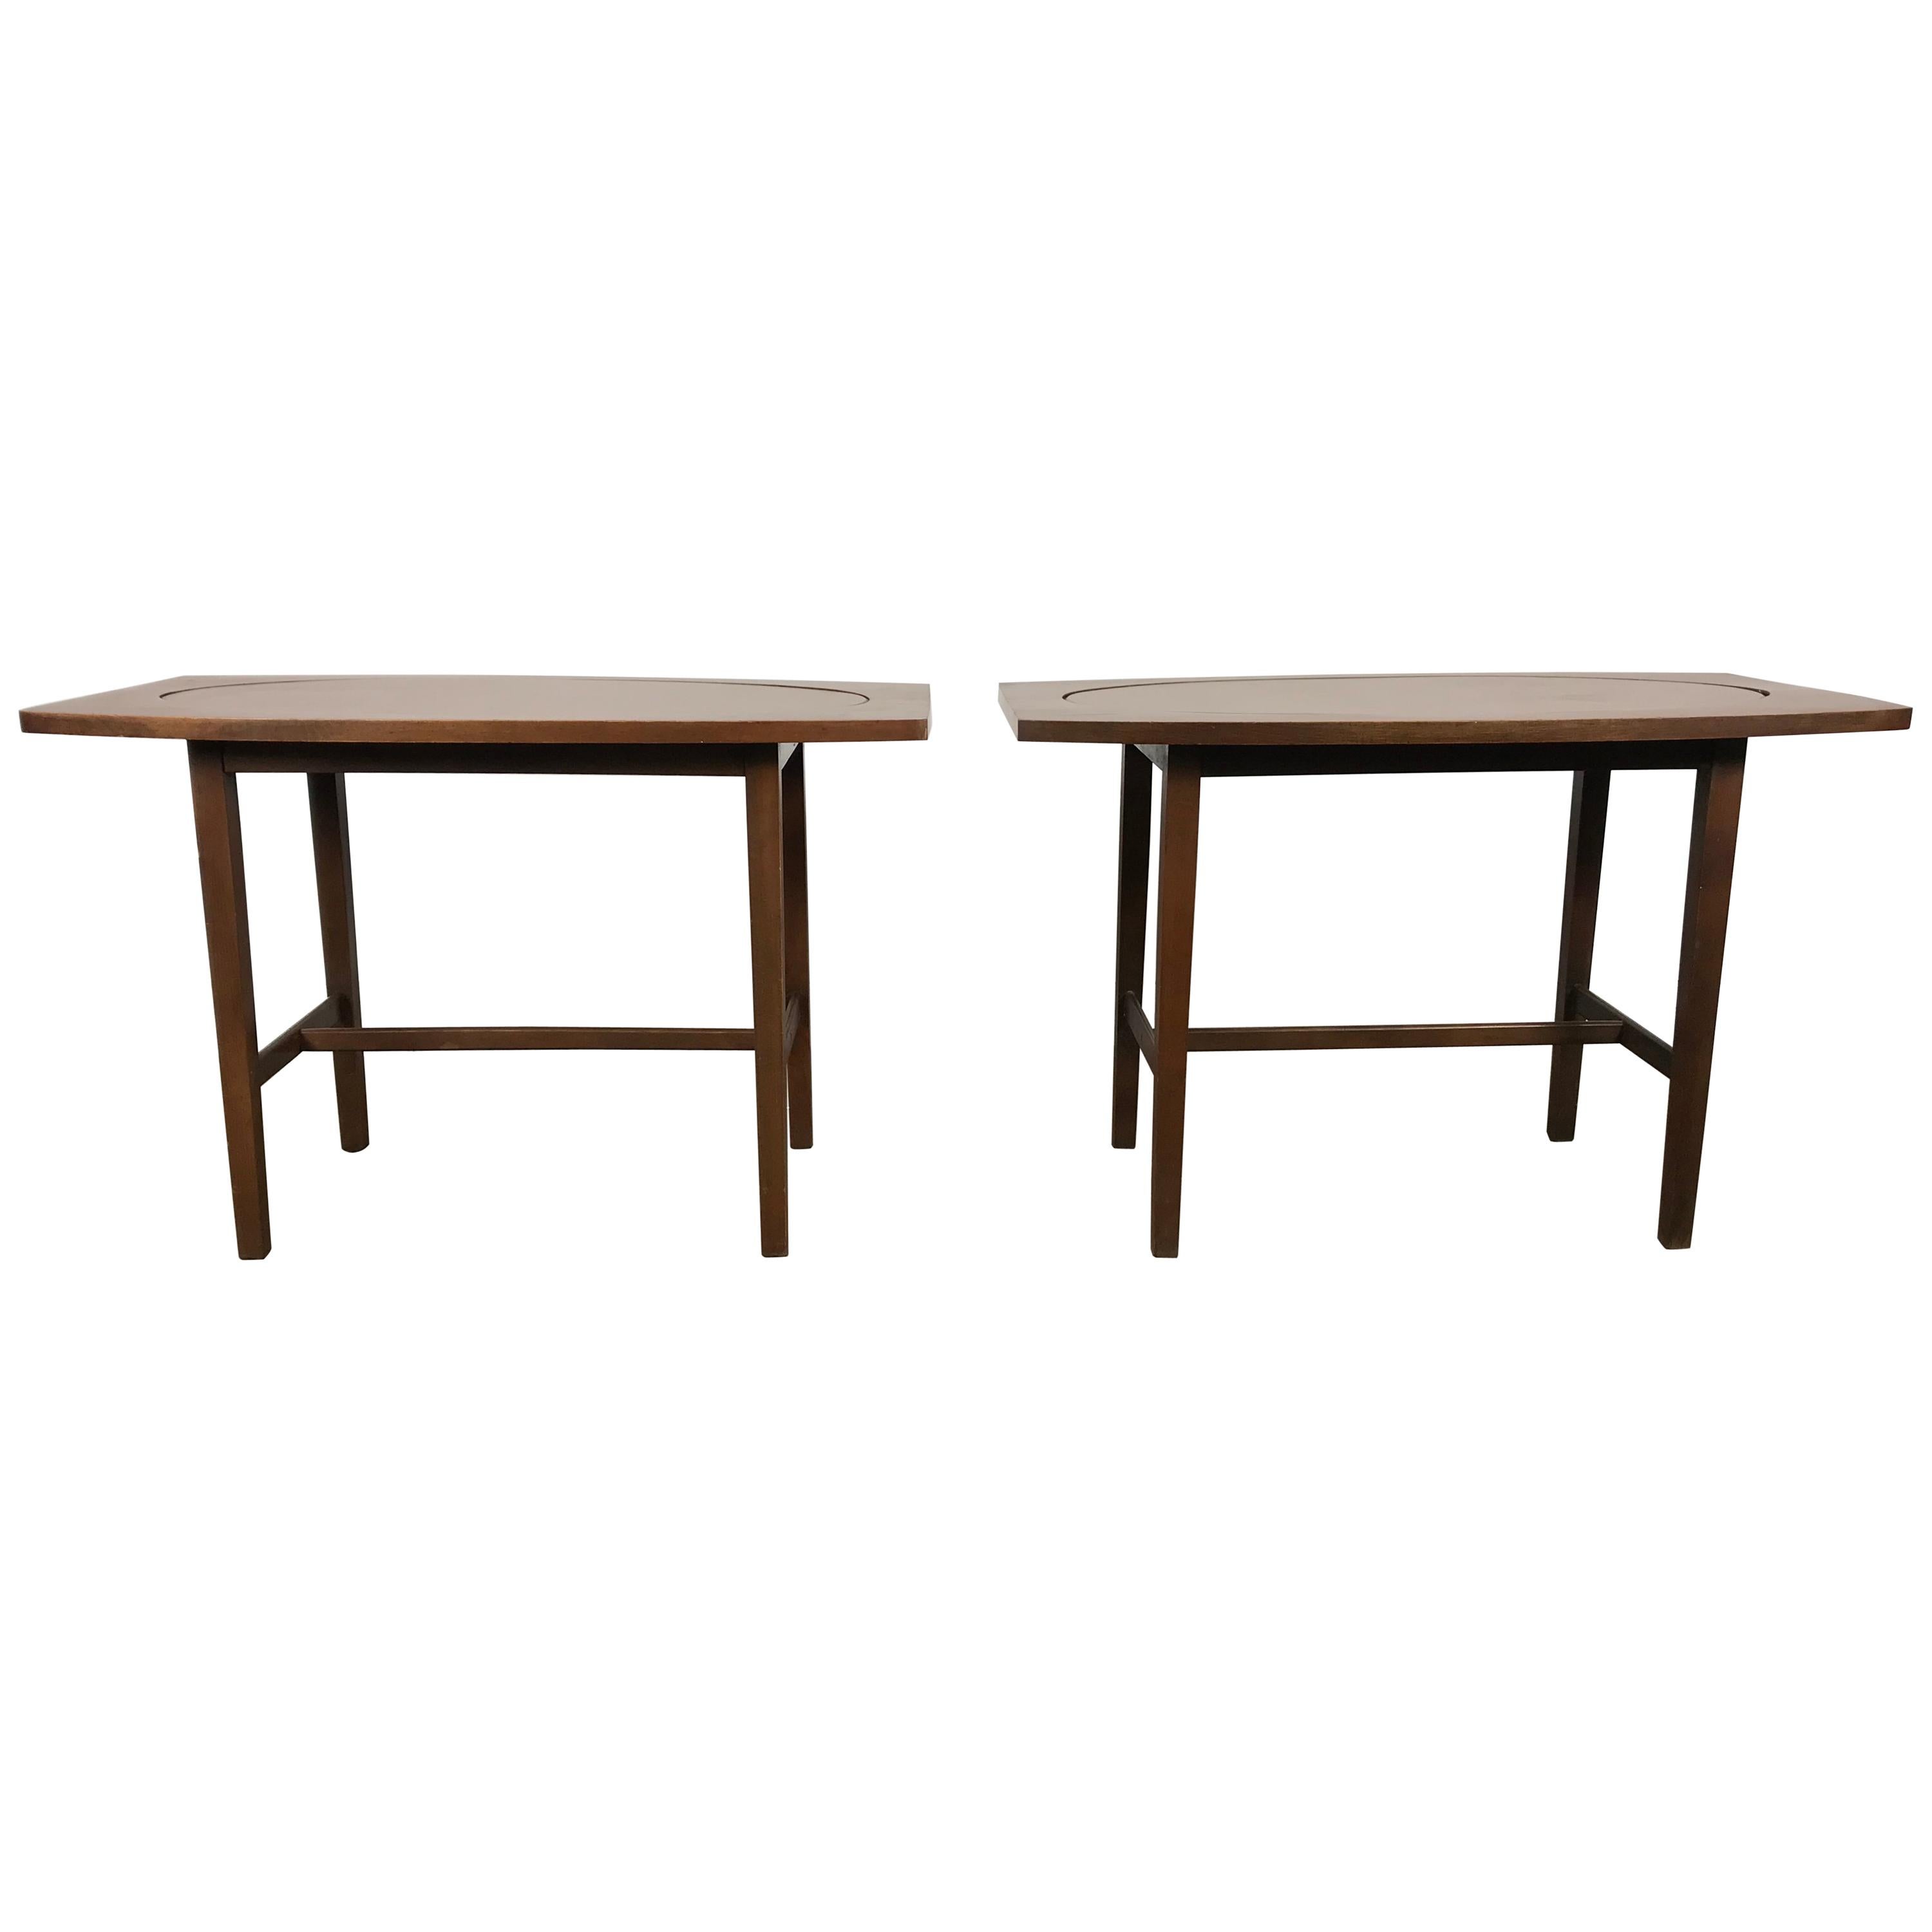 Paul McCobb End Tables Perimeter Group for Winchendon Furniture Co. 1950 For Sale